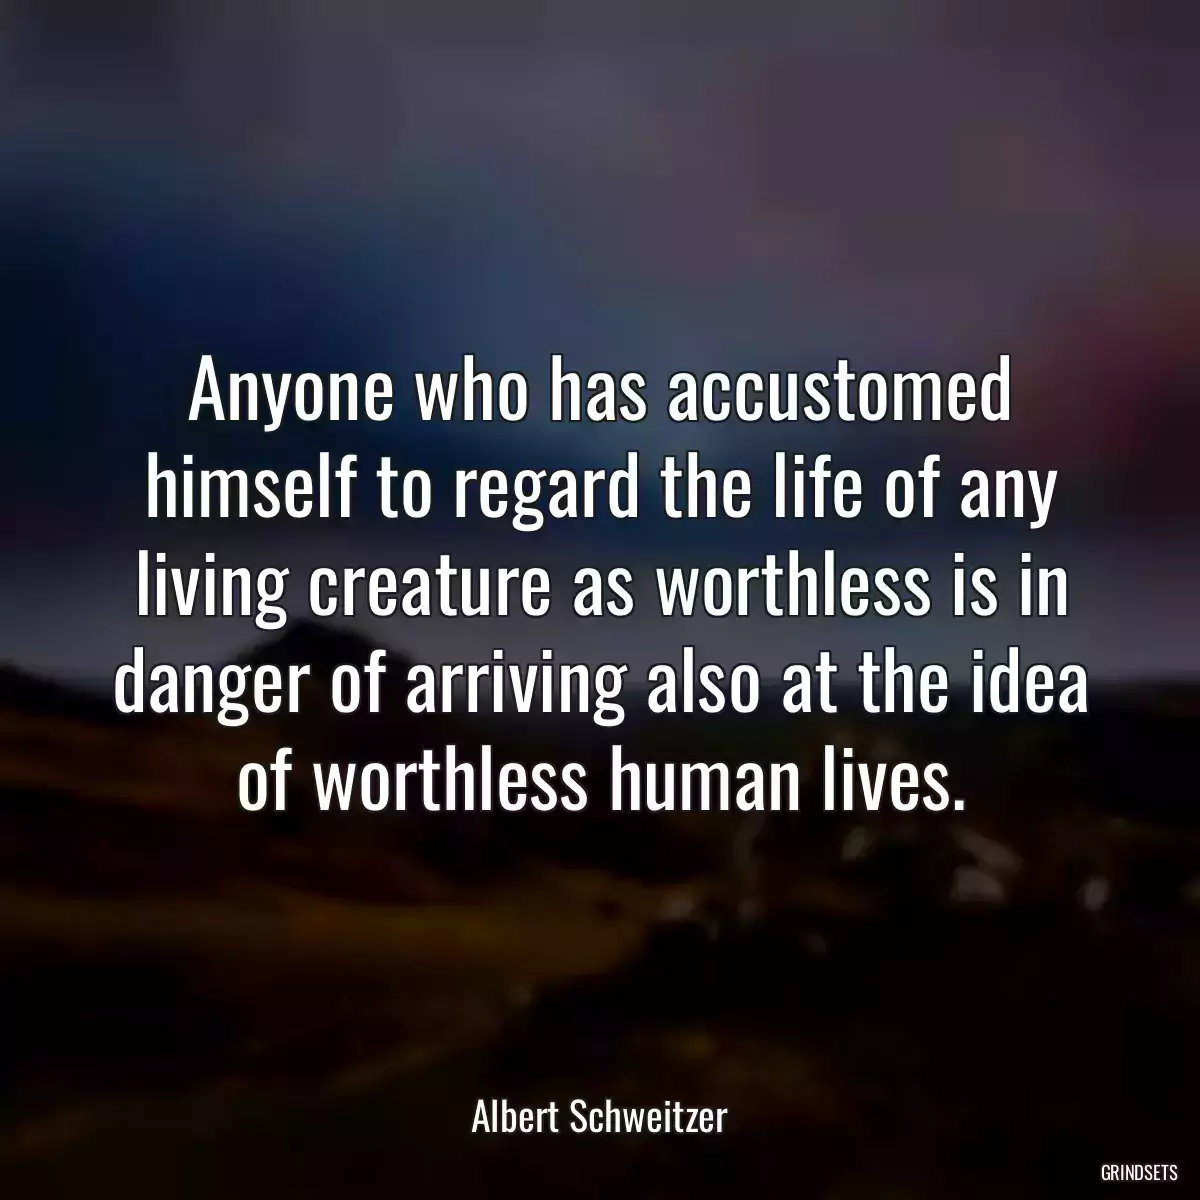 Anyone who has accustomed himself to regard the life of any living creature as worthless is in danger of arriving also at the idea of worthless human lives.